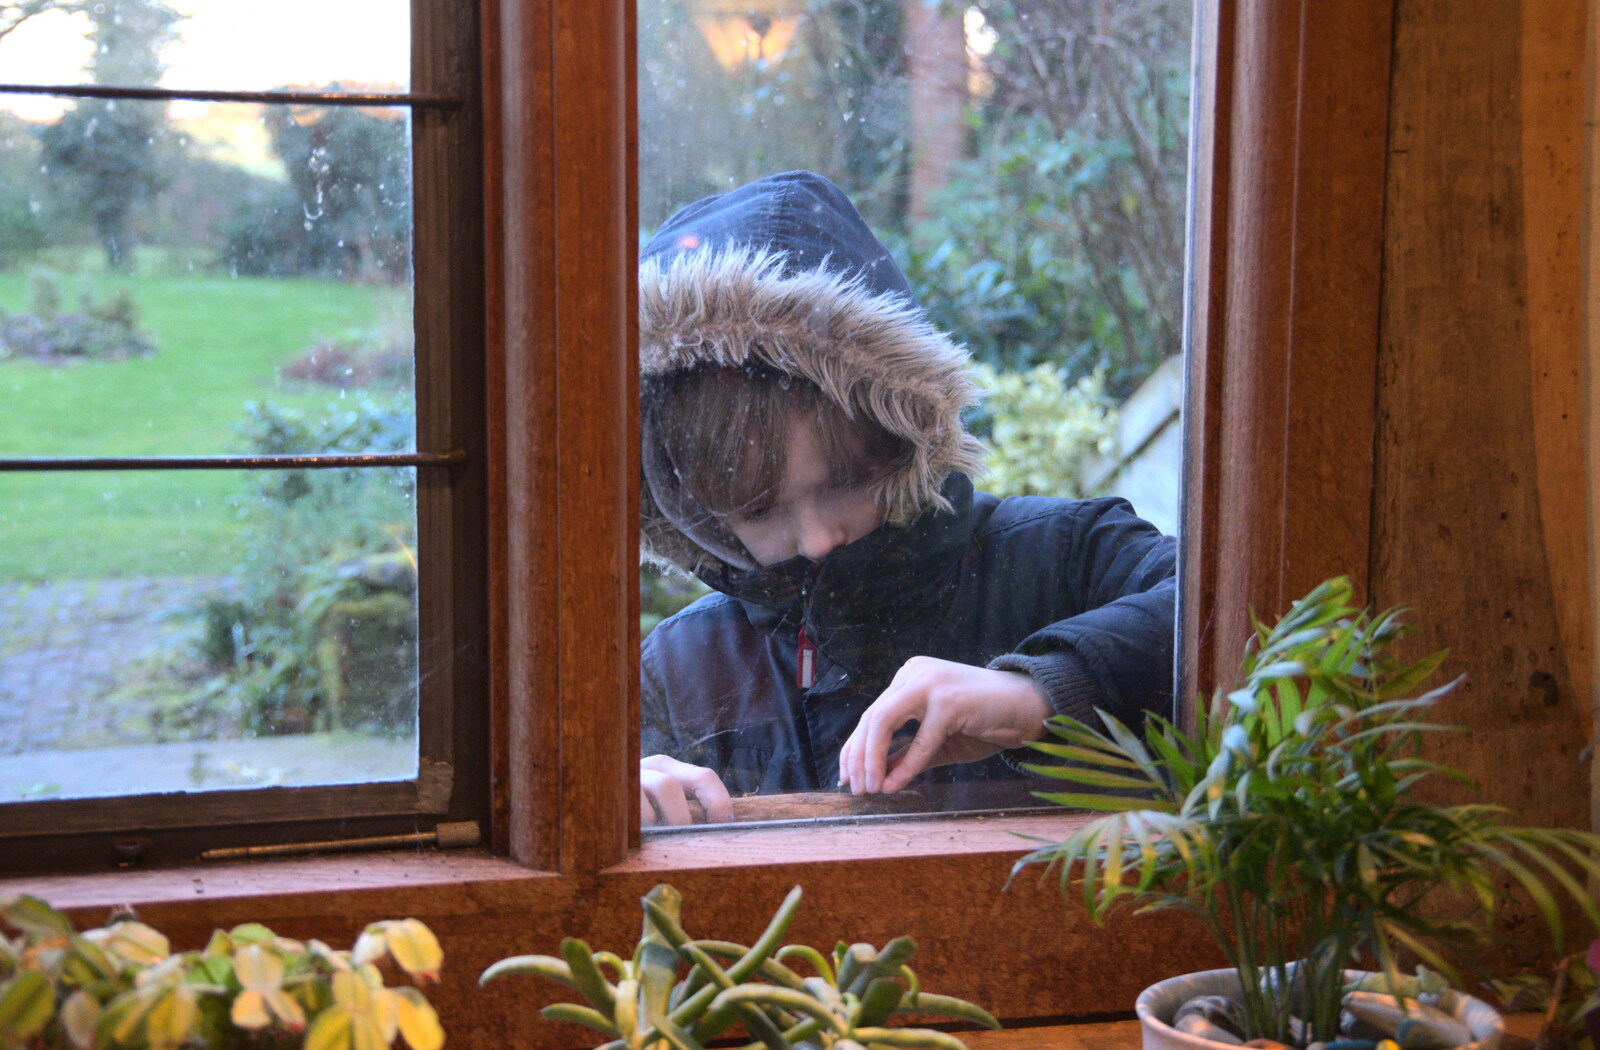 Harry's doing some more whittling outside from Snowdrops at Talconeston Hall, Tacolneston, Norfolk - 7th February 2020